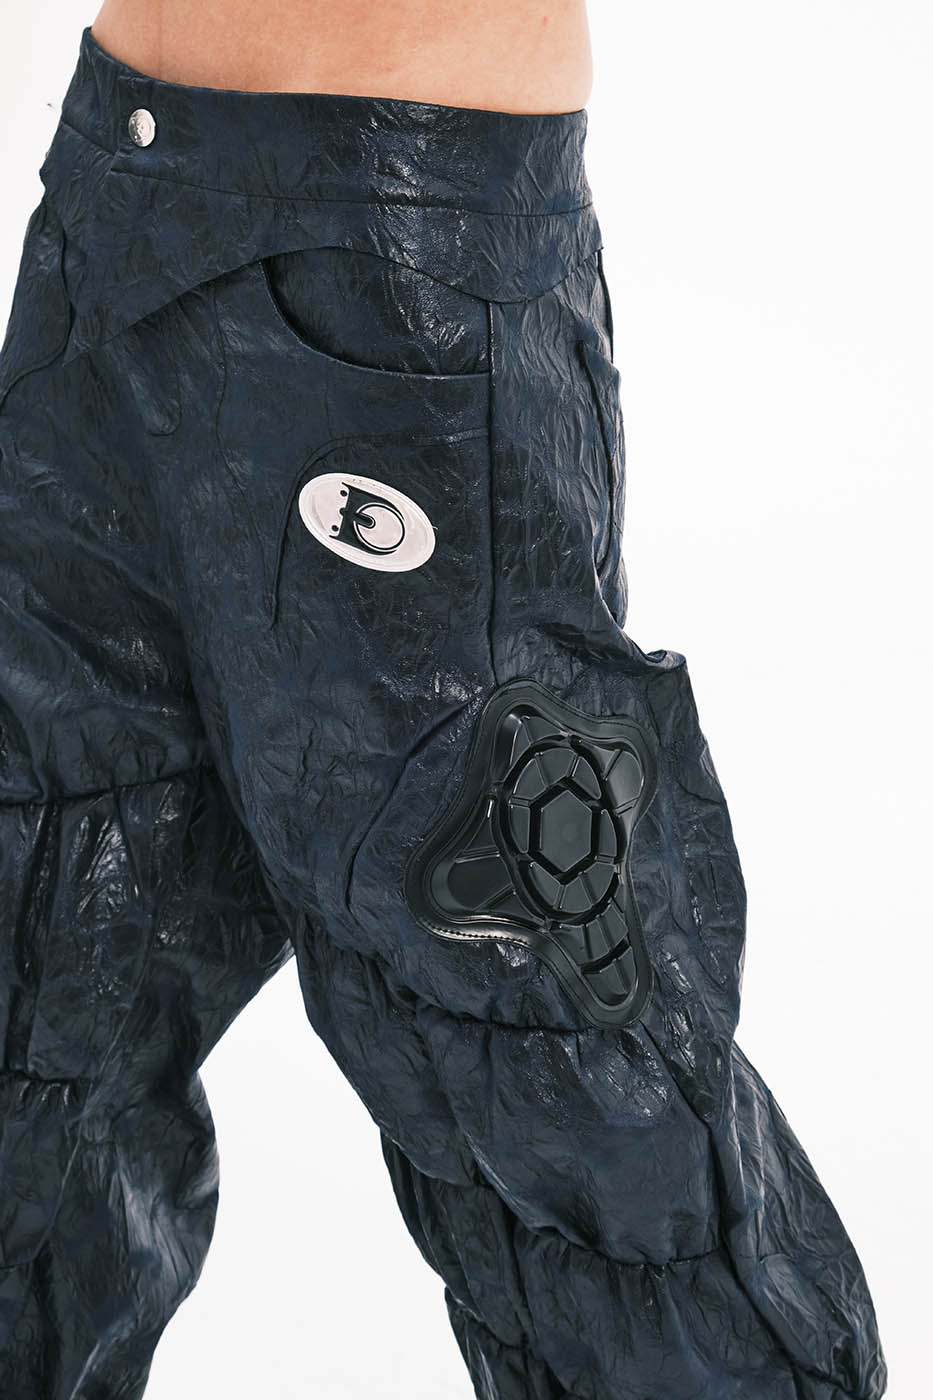 EMBRYO Spliced Faux Leather Tactical Pants, premium urban and streetwear designers apparel on PROJECTISR.com, EMBRYO